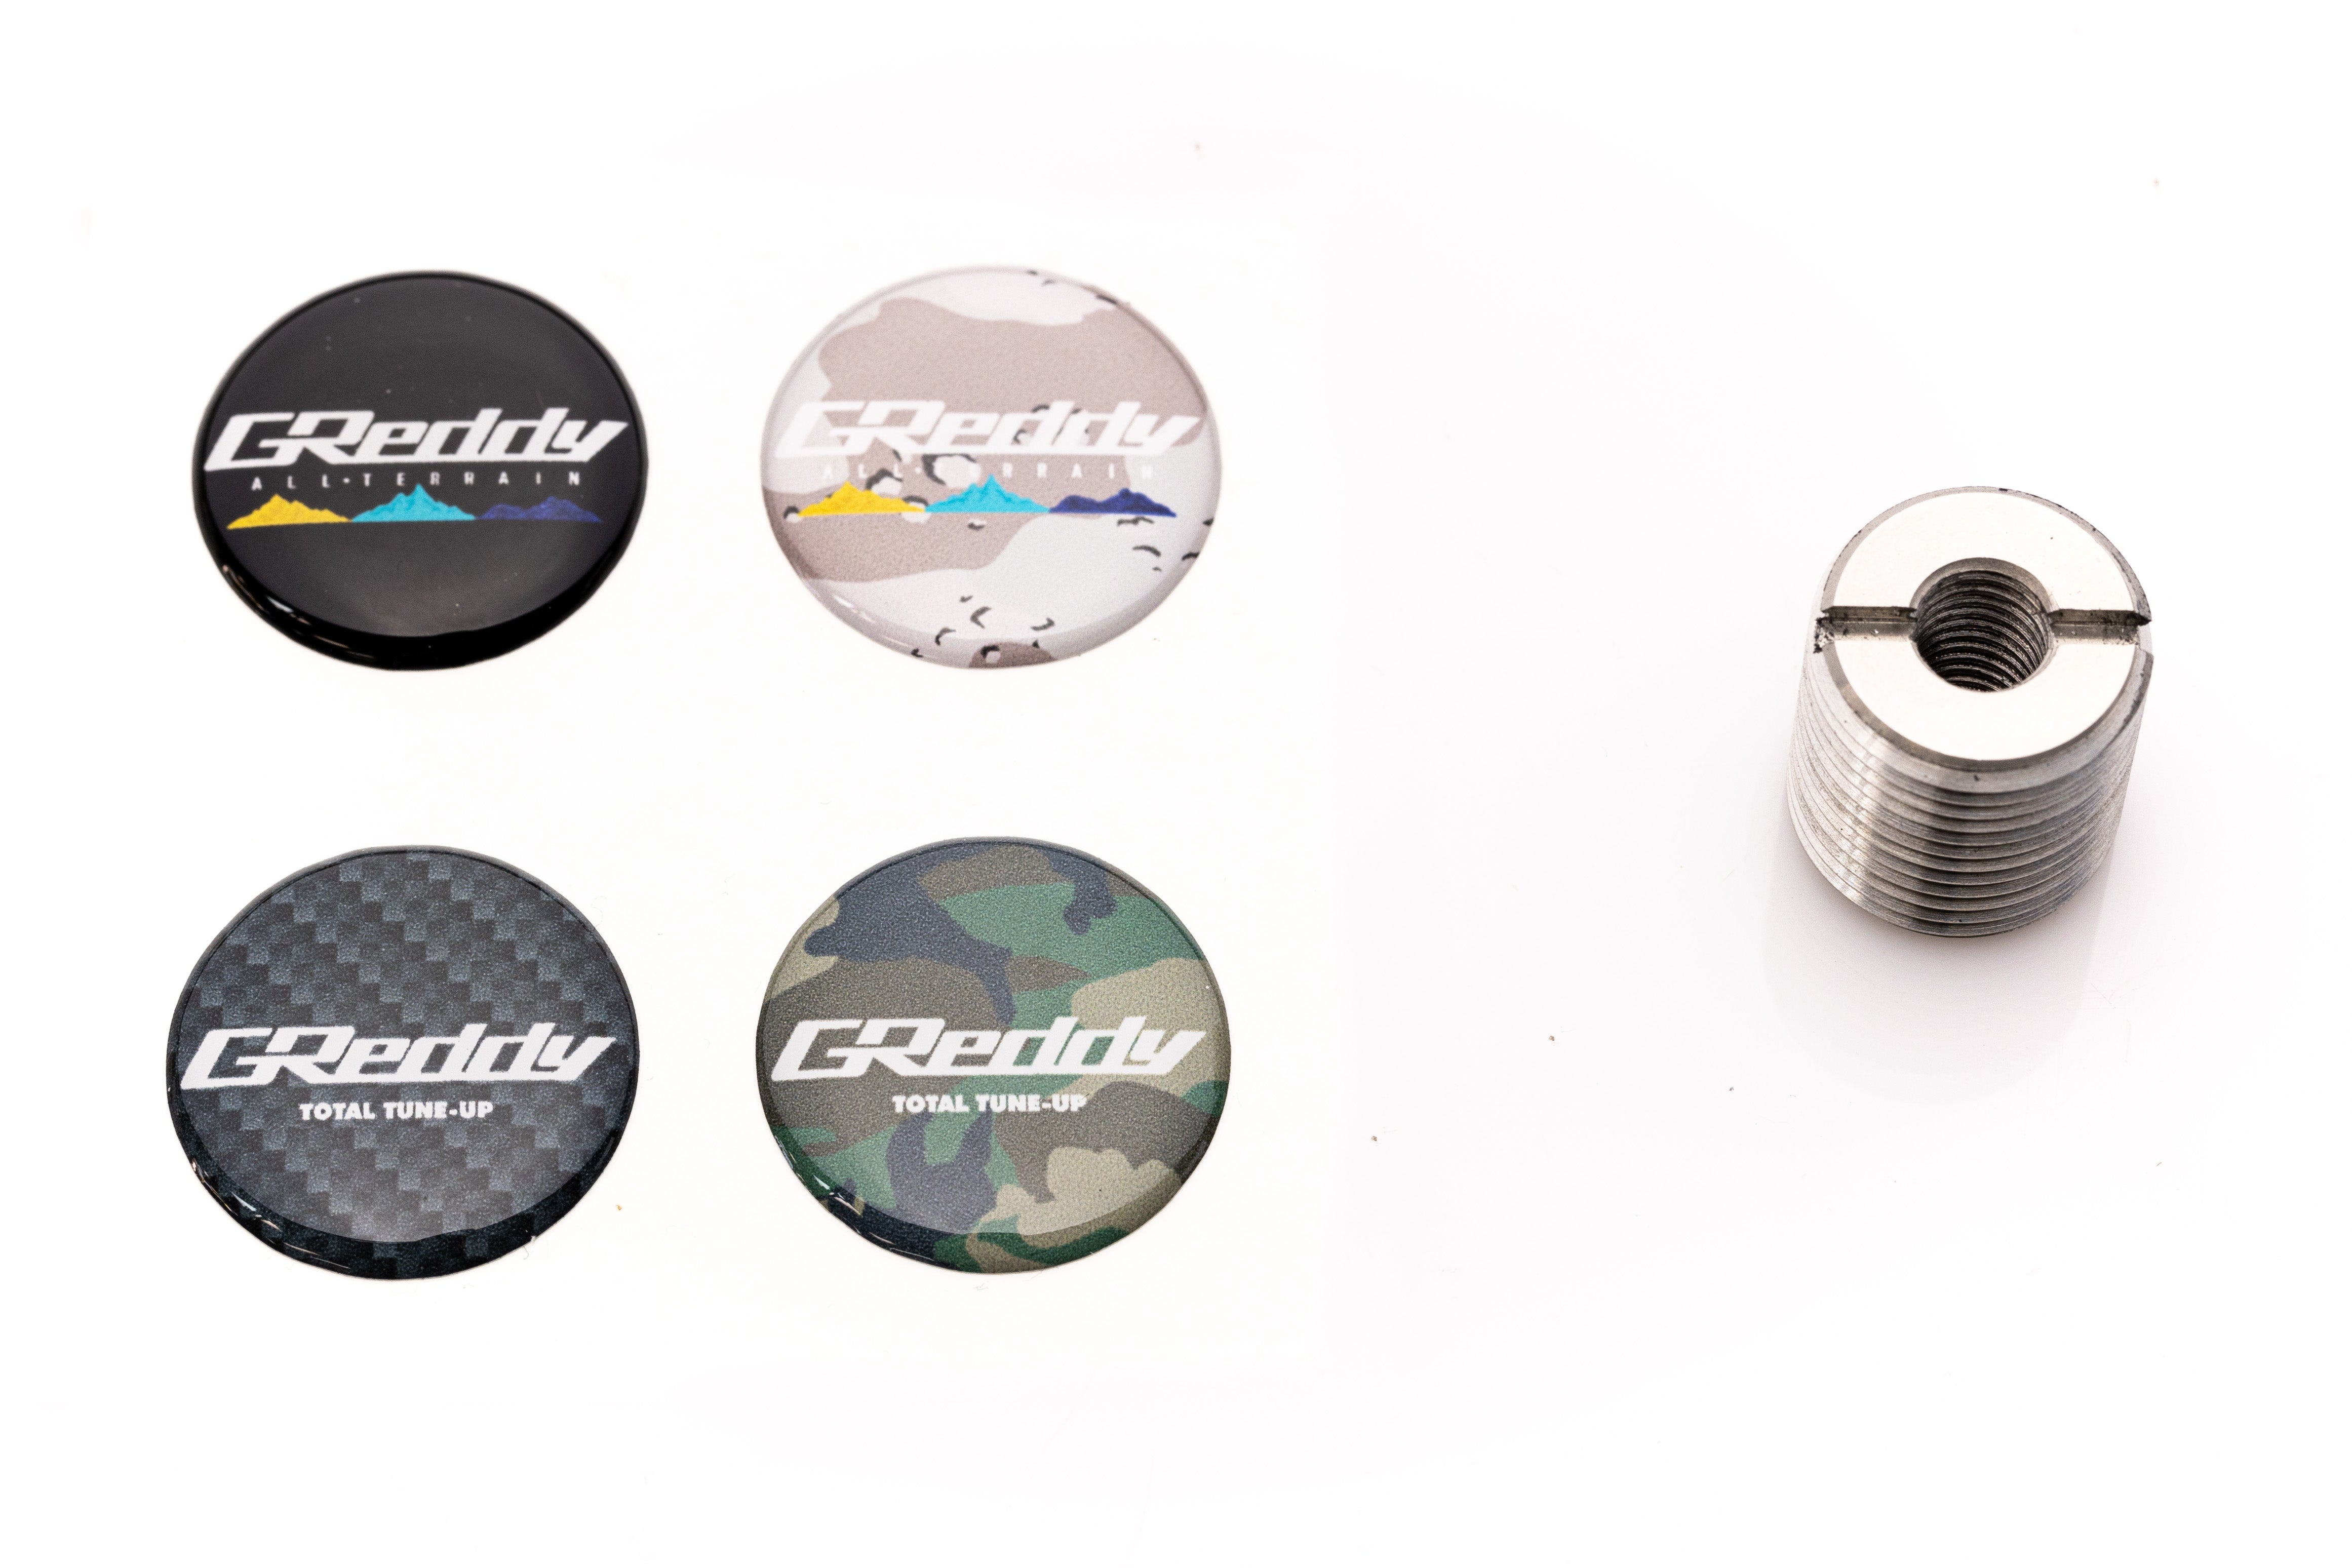 GReddy Type A Shift Knobs - Polished